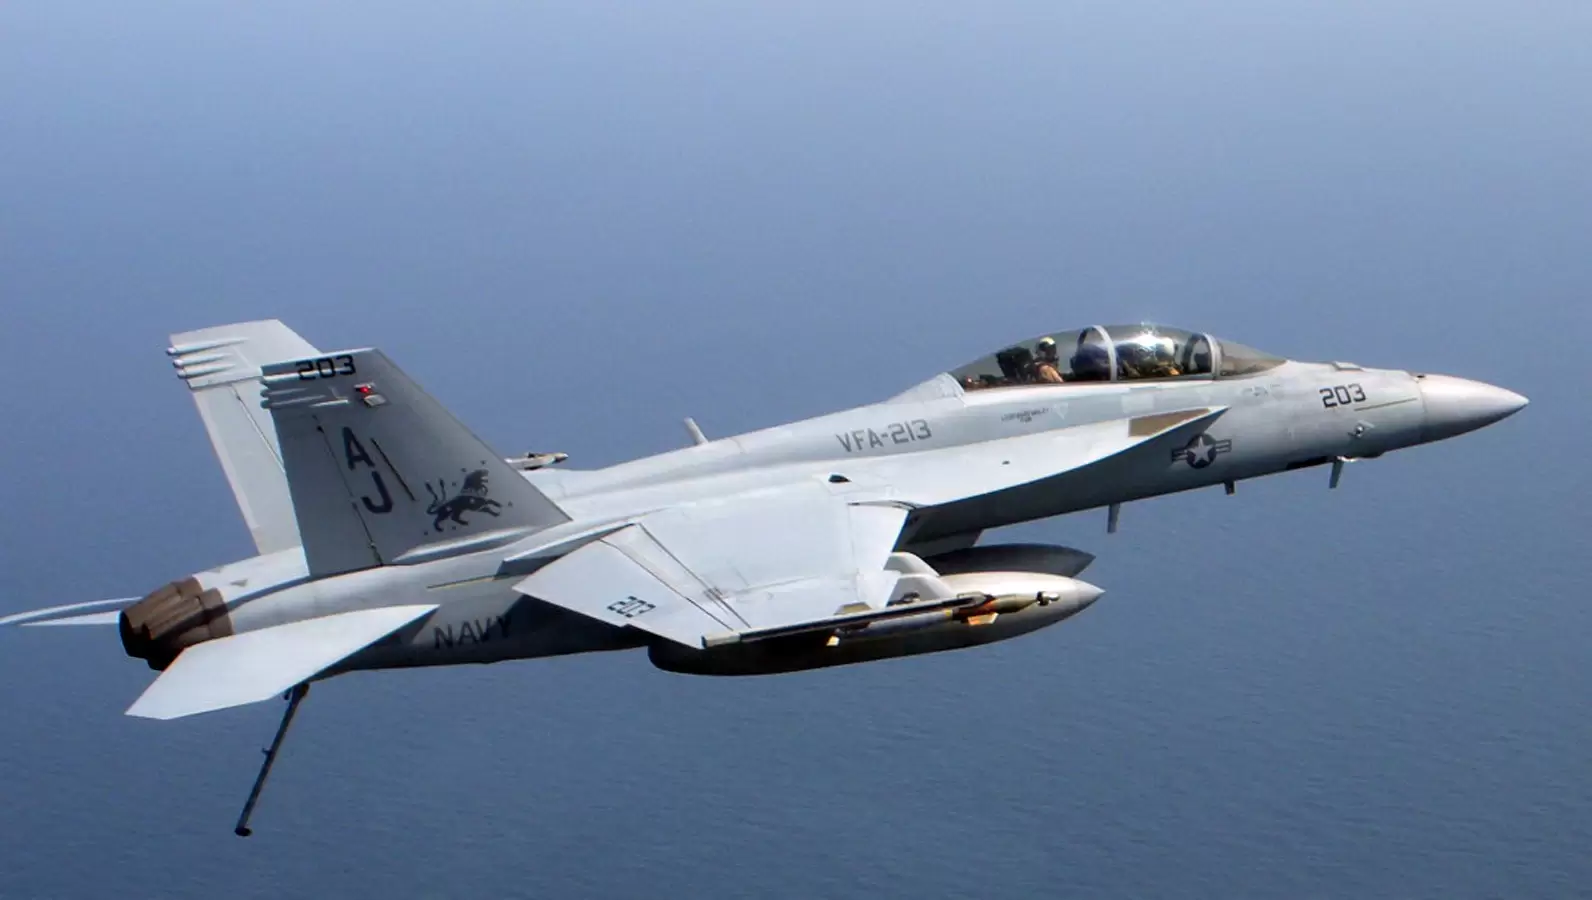 Amazing facts about the Boeing F/A-18E/F Super Hornet